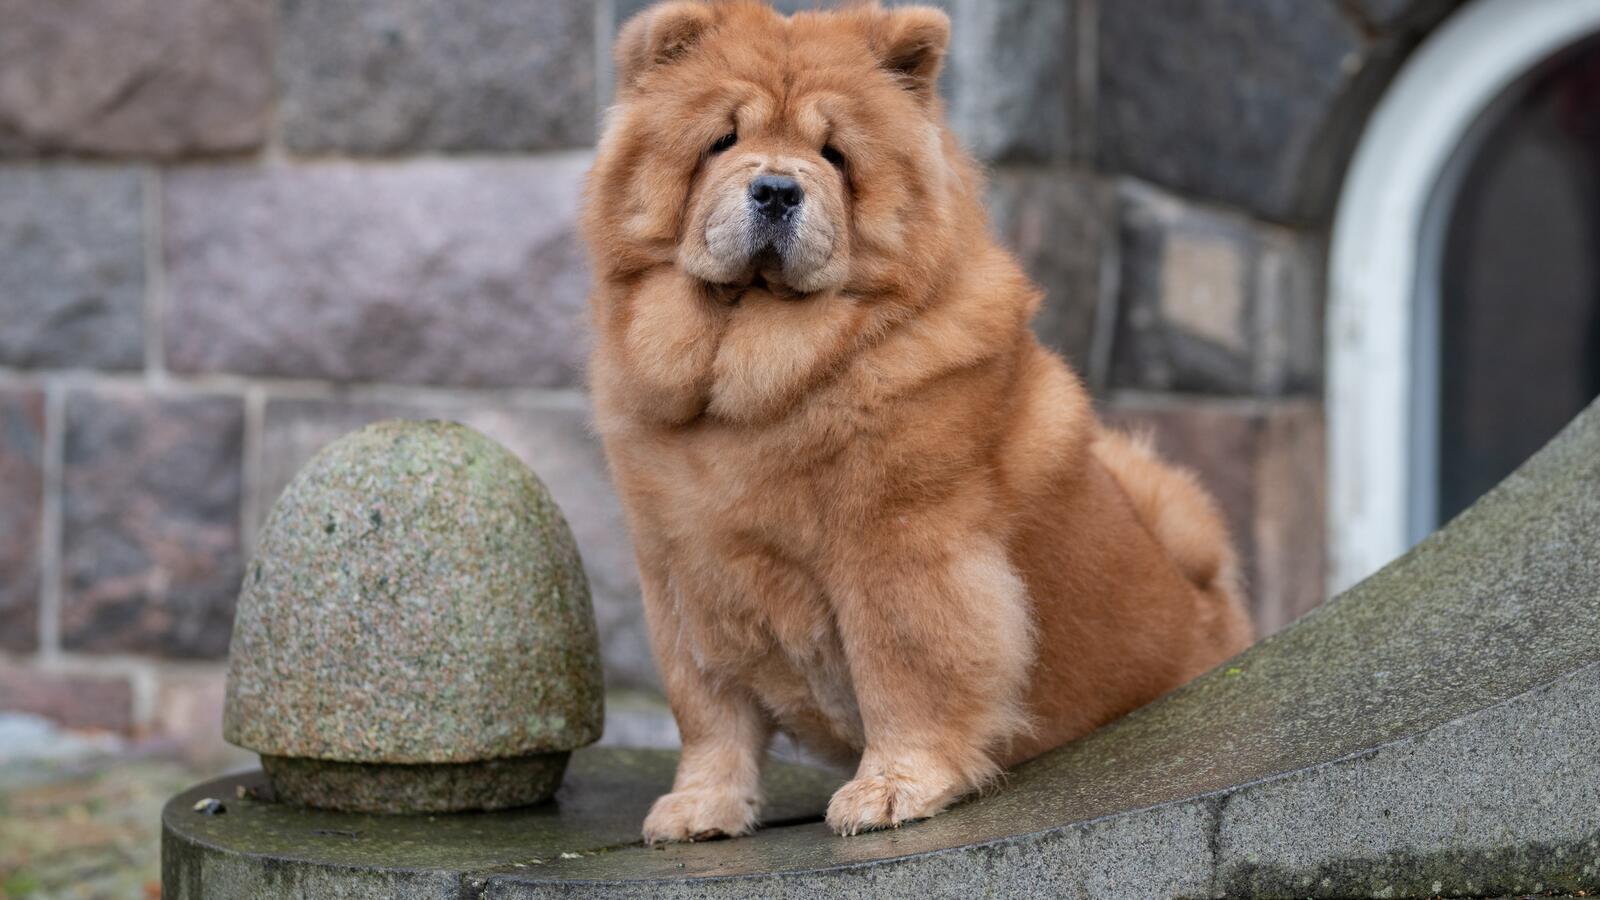 Wallpapers wallpaper brown chow chow dog dogs cute on the desktop